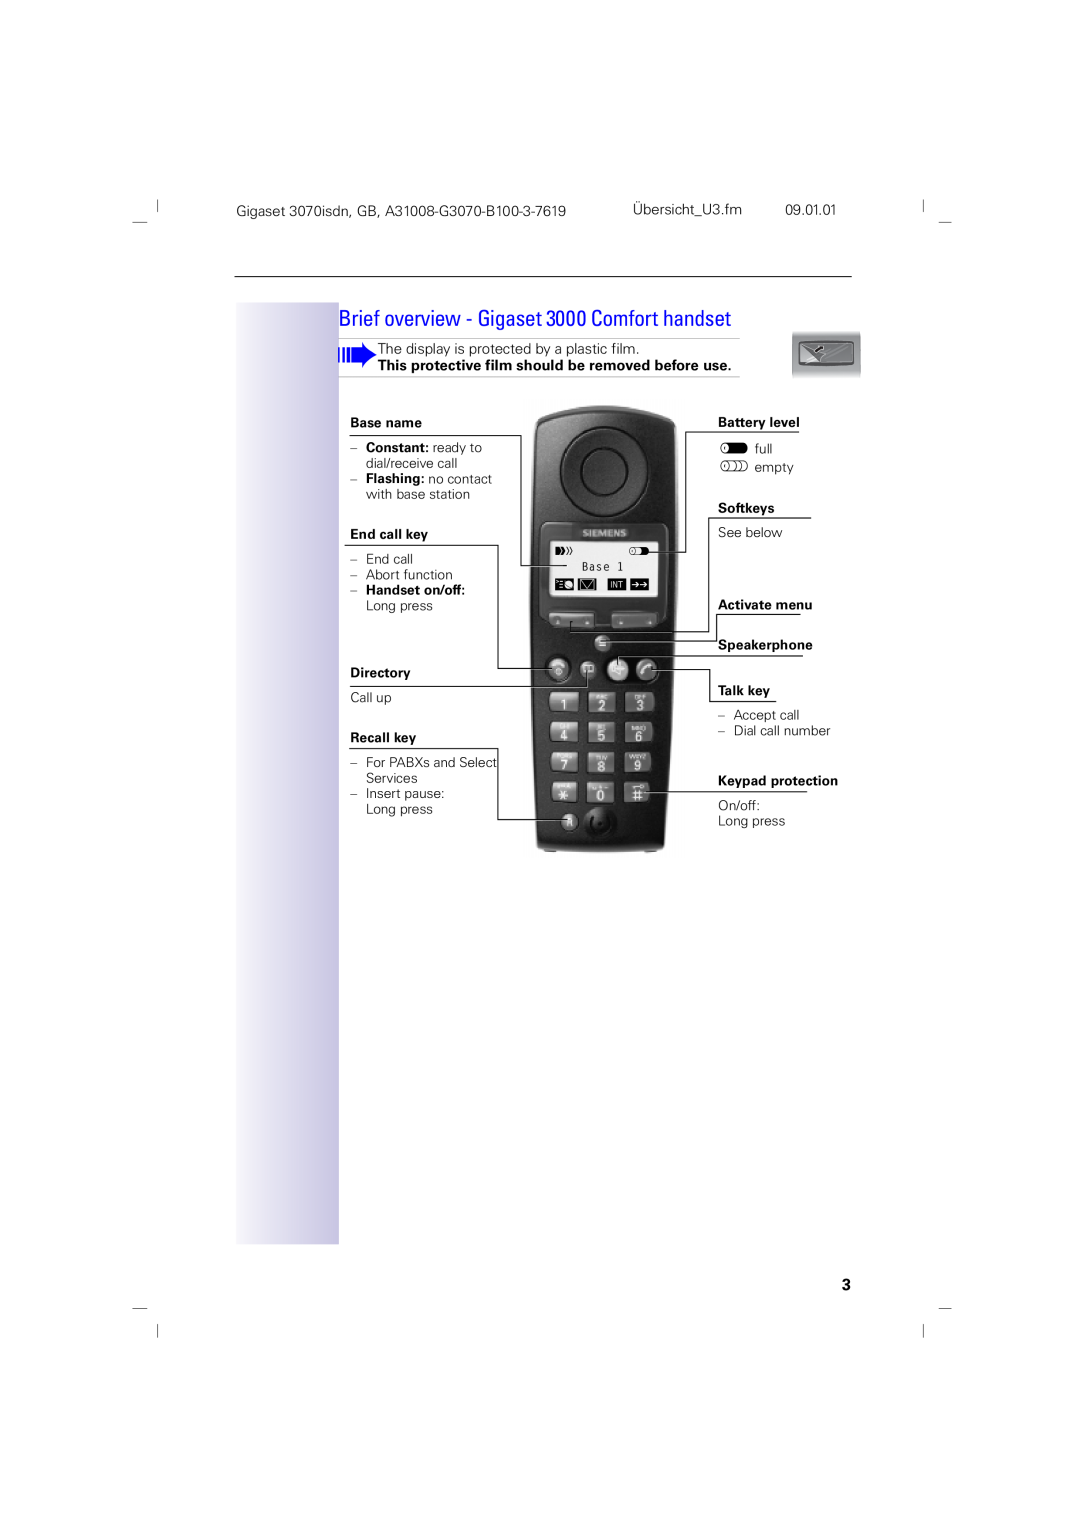 Siemens 75 Brief overview - Gigaset 3000 Comfort handset, This protective film should be removed before use, End call key 